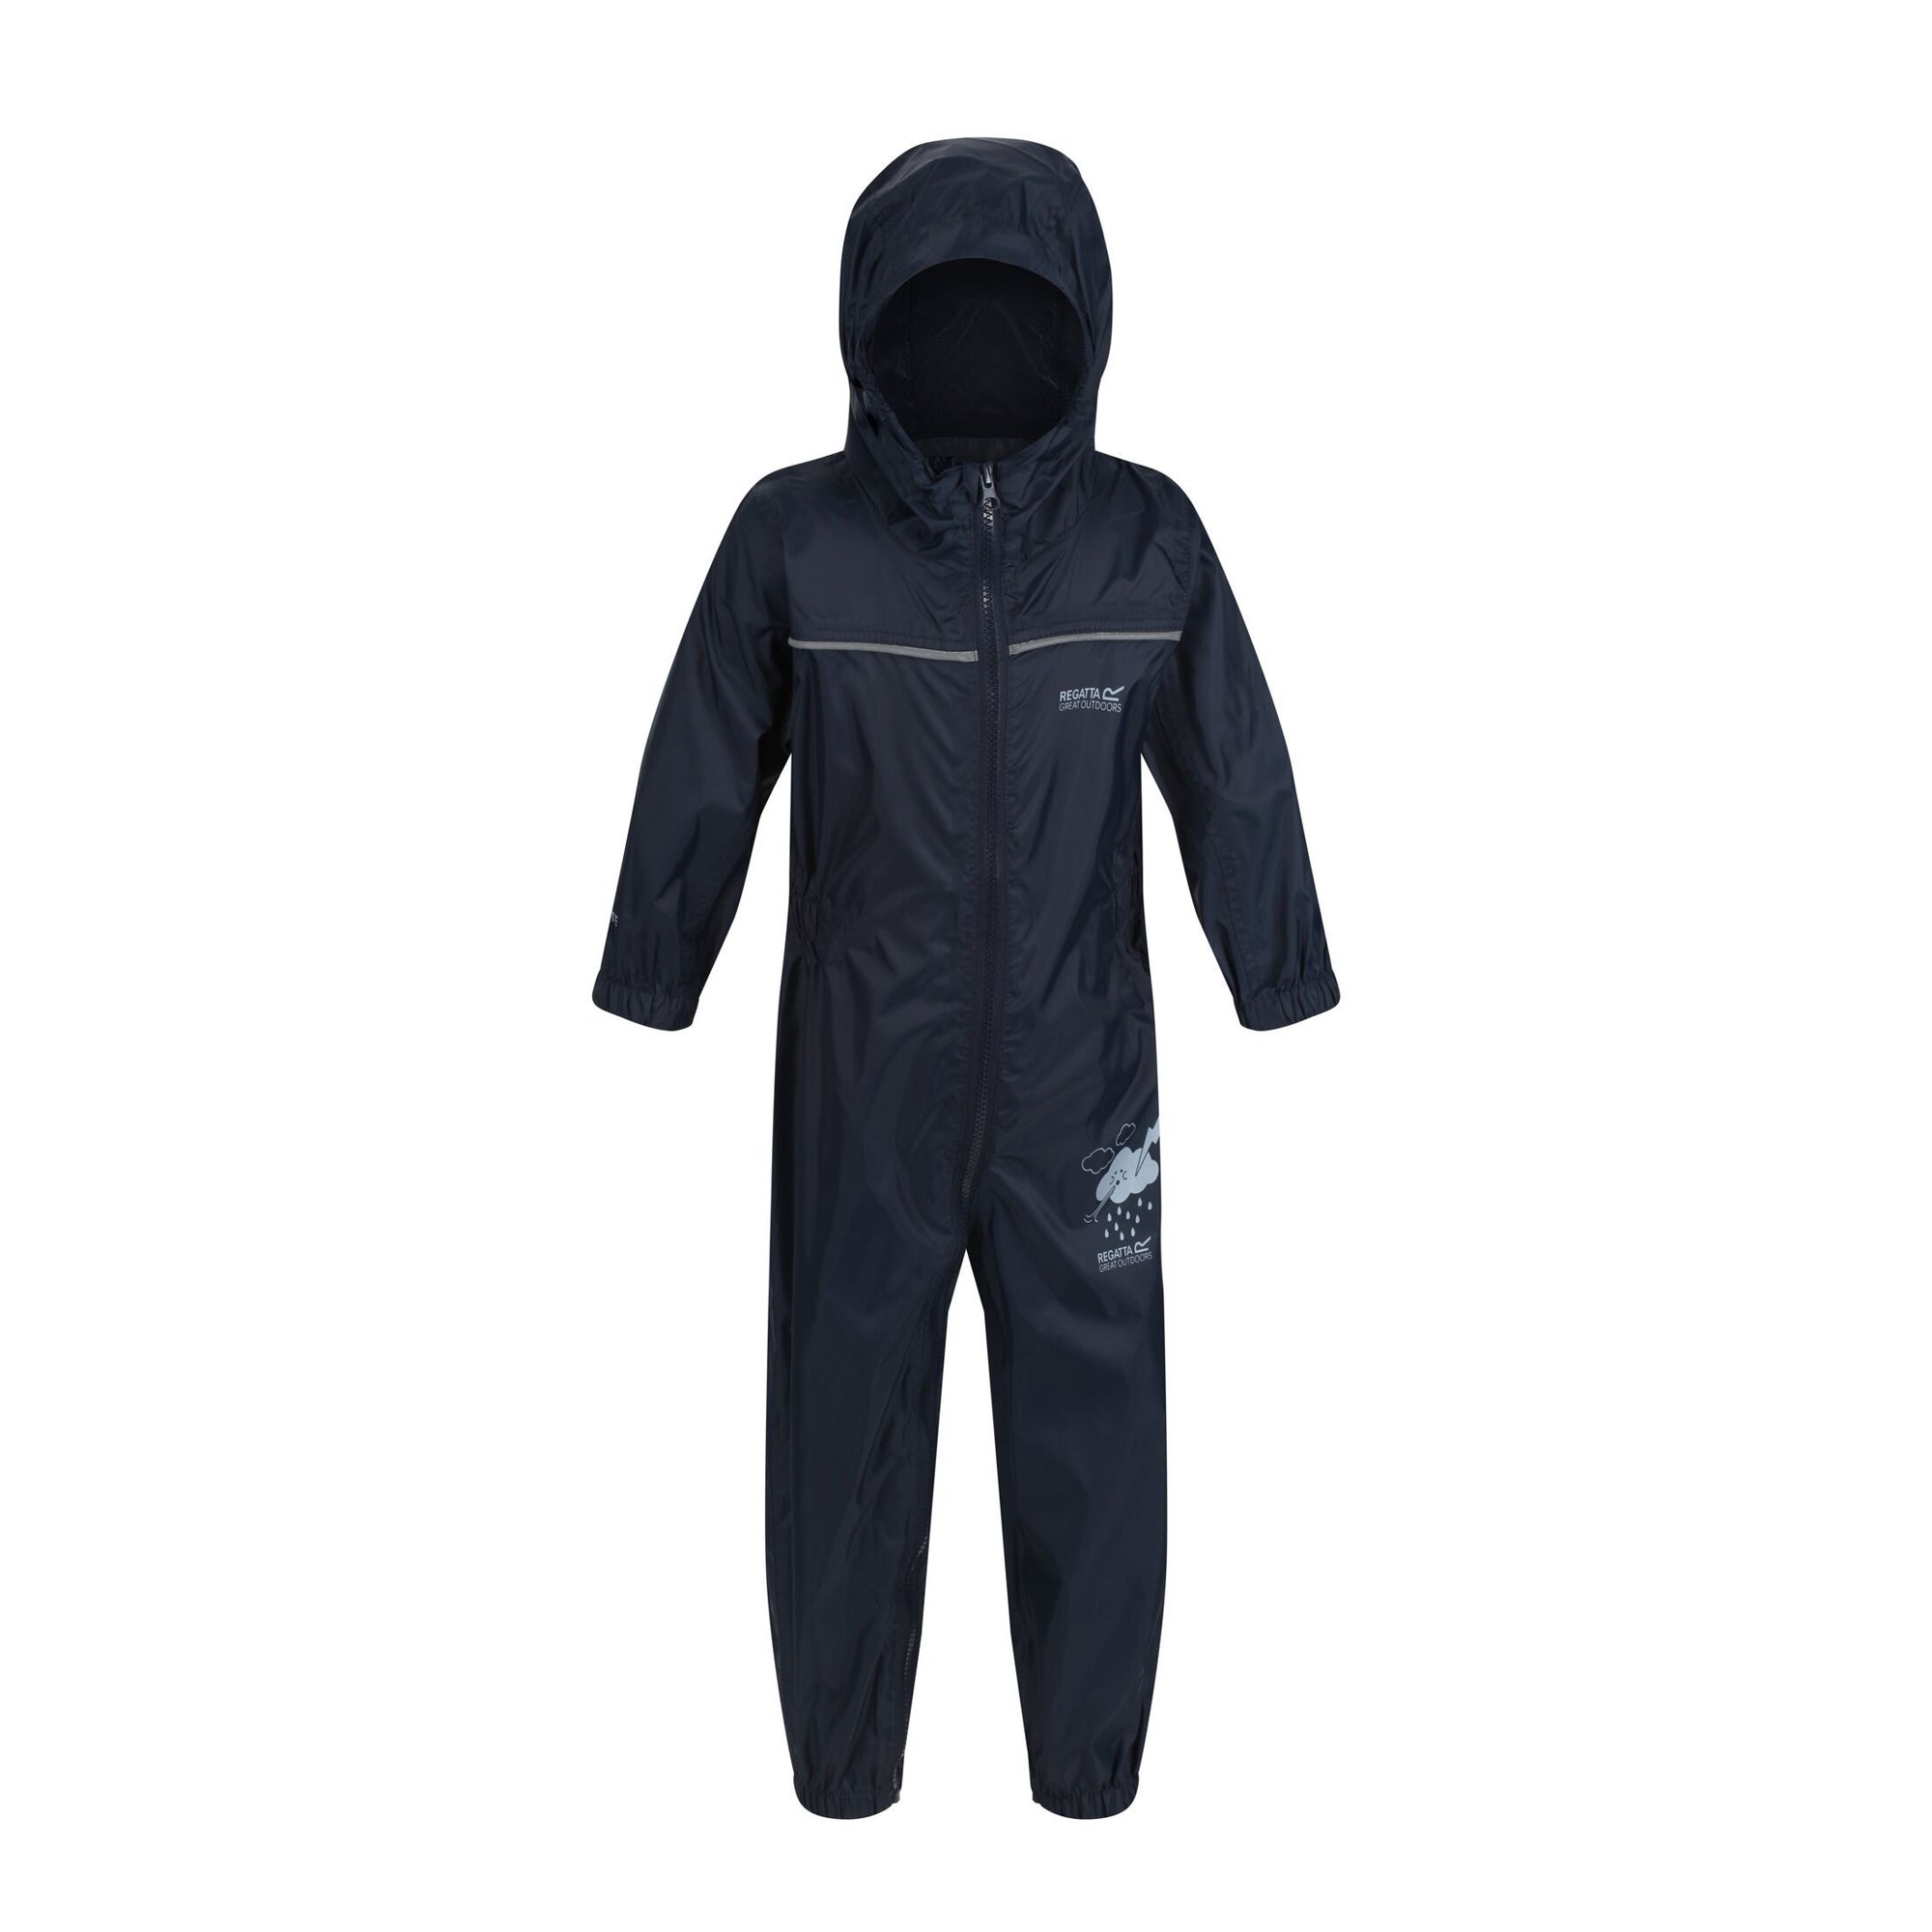 Regatta Great Outdoors Childrens Toddlers Puddle IV Waterproof Rainsuit